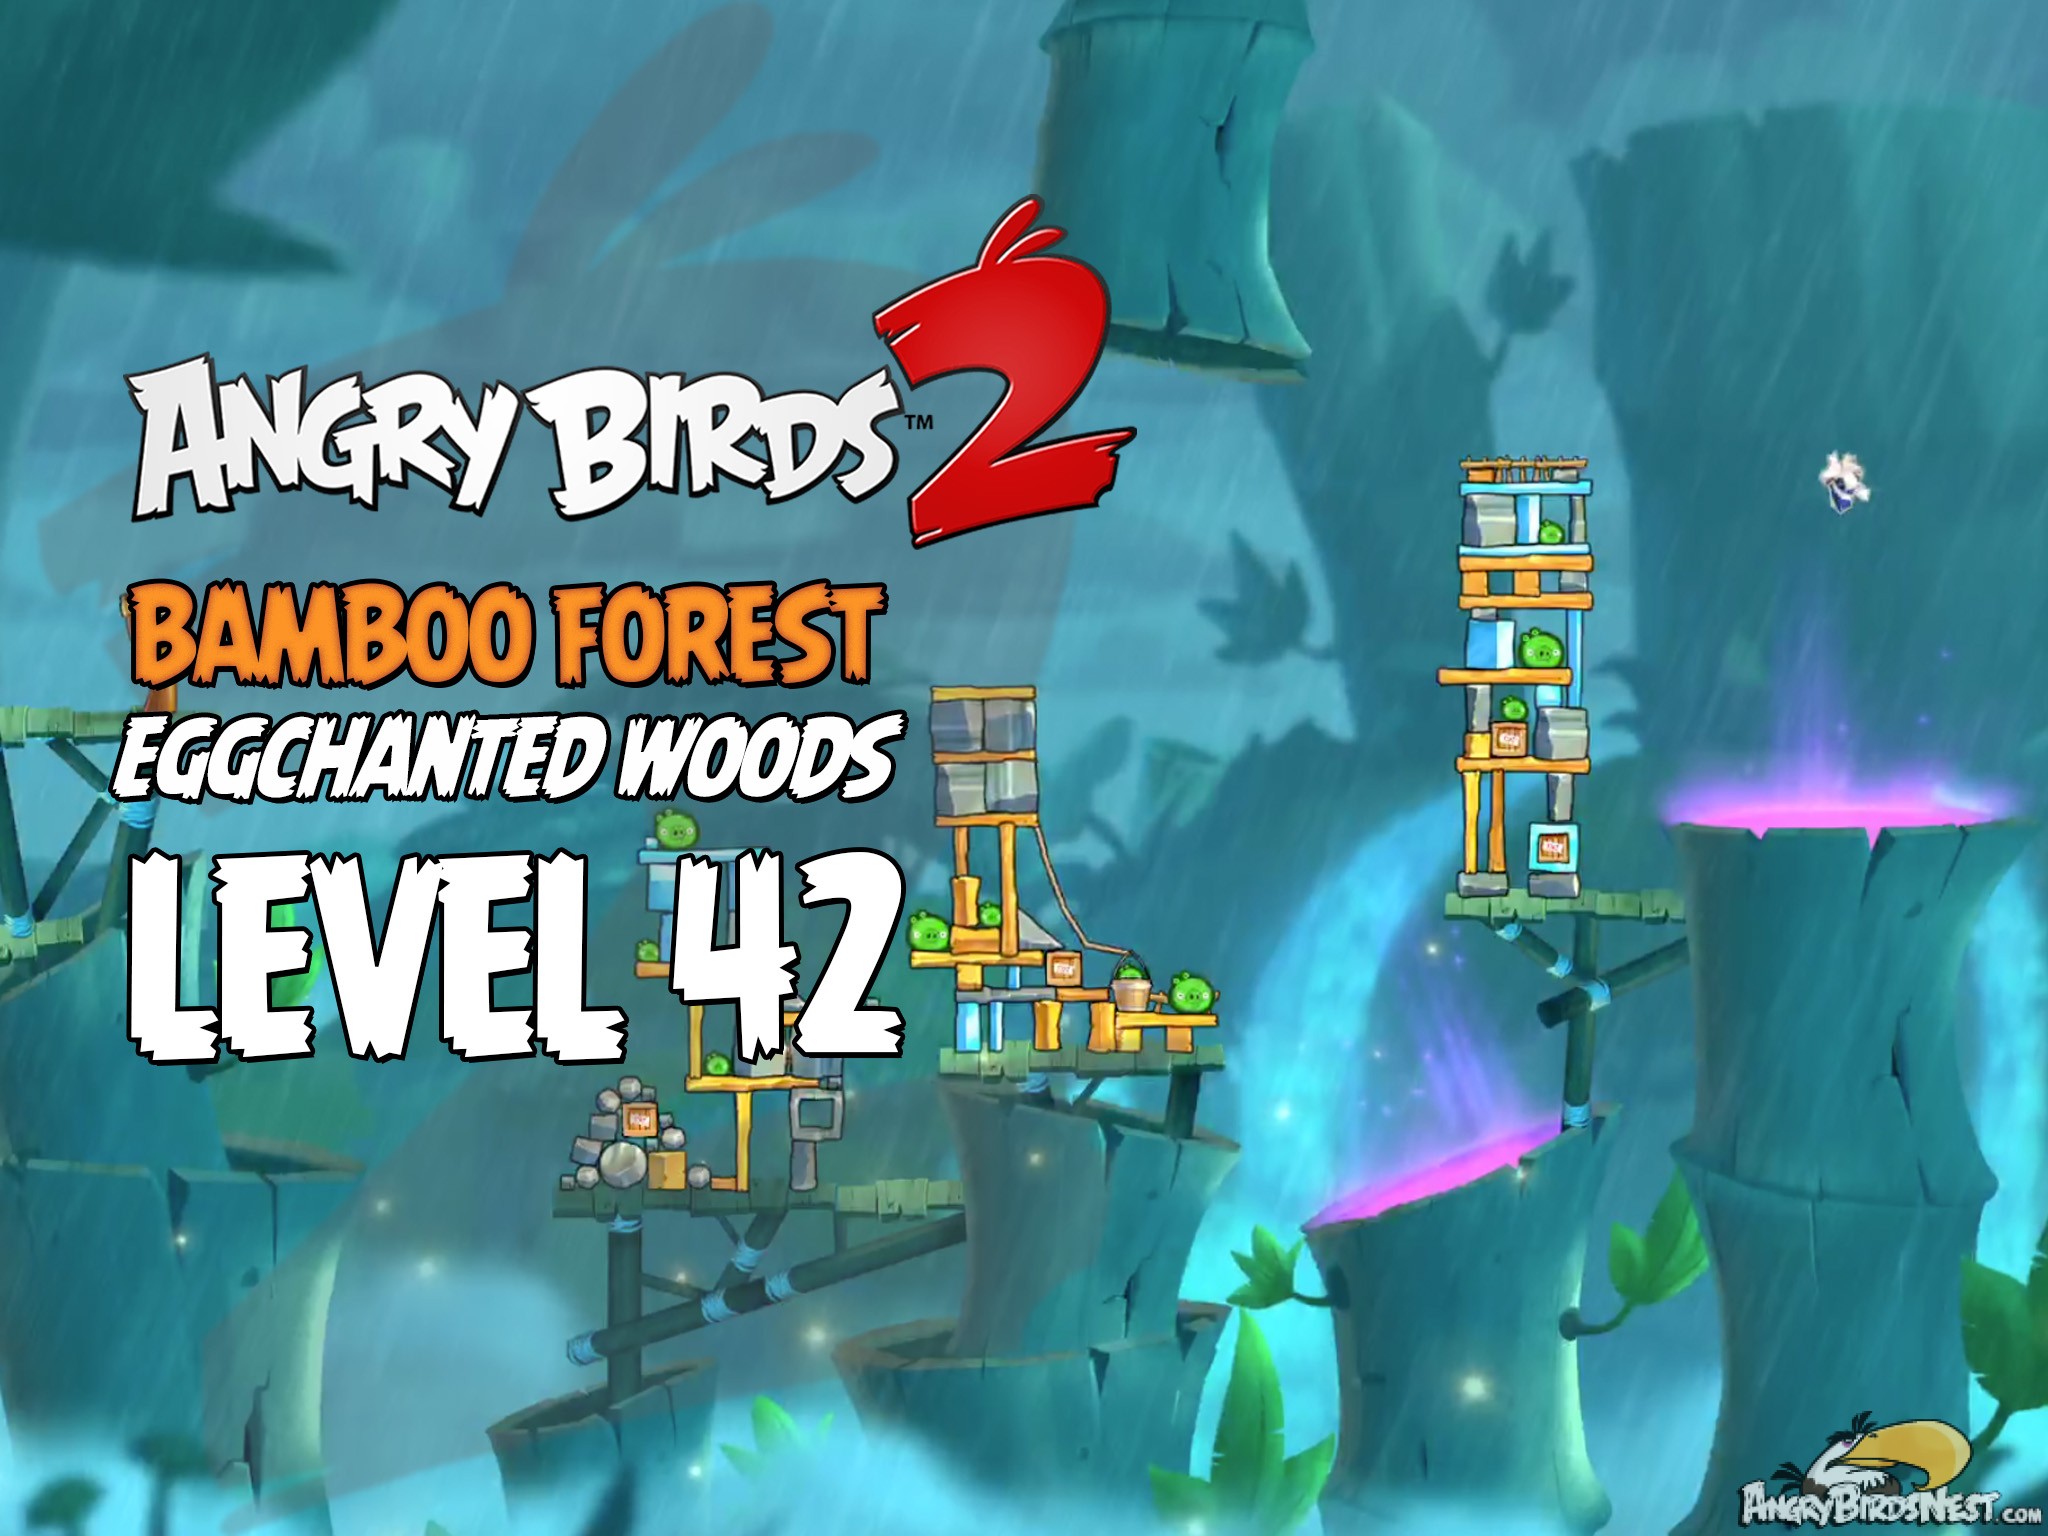 Angry Birds 2 Bamboo Forest Eggchanted Woods Level 42